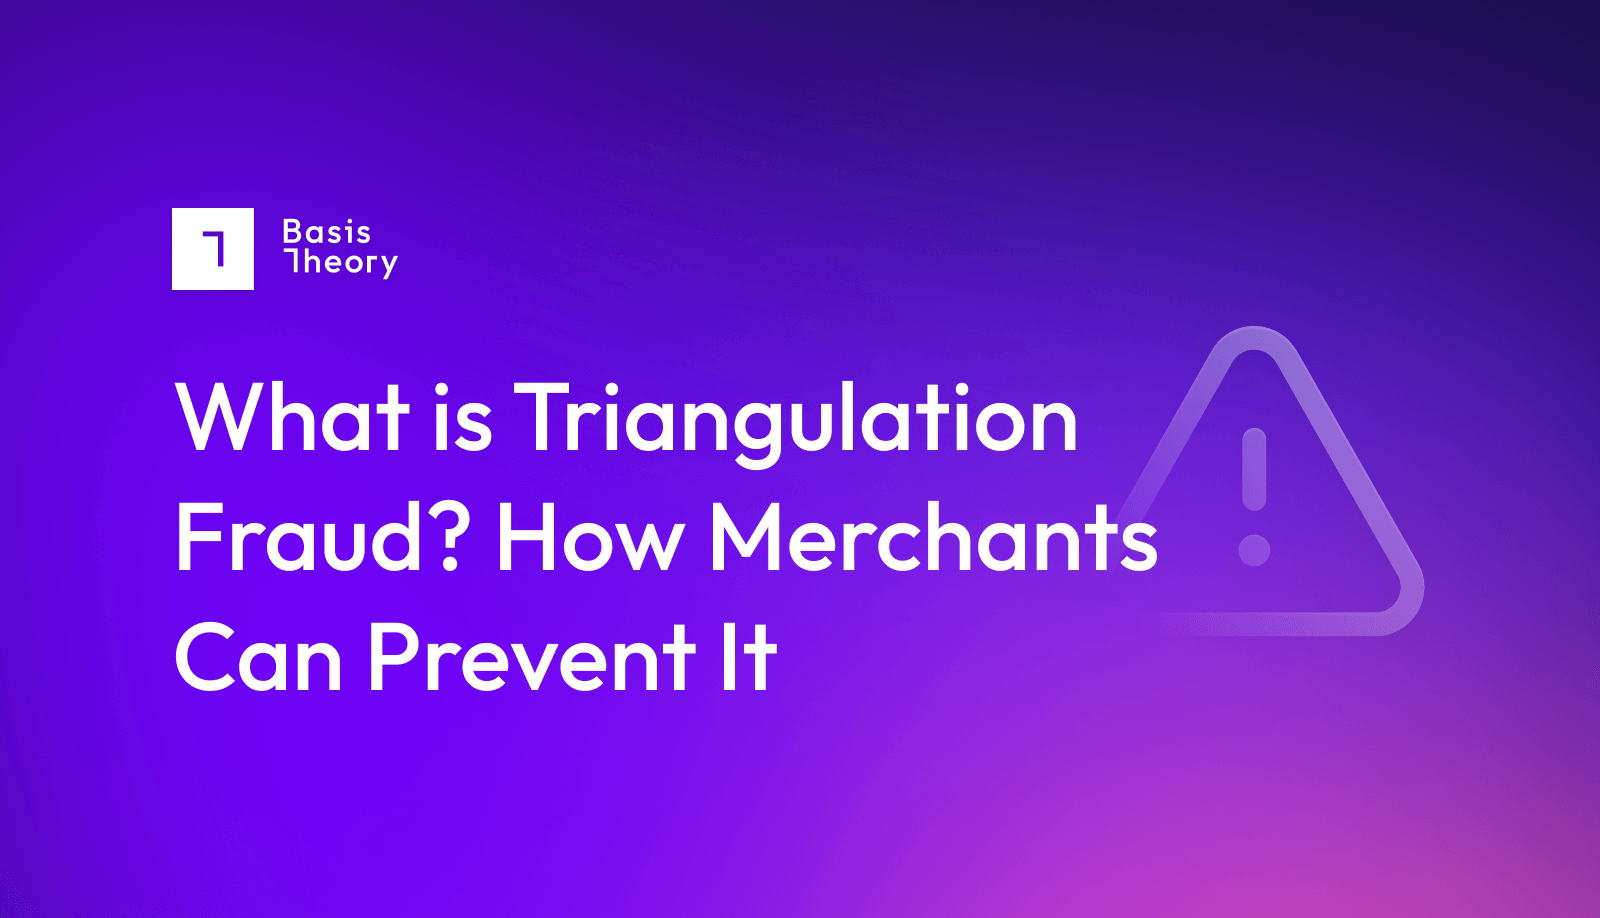 What is Triangulation Fraud and how can merchants prevent it?